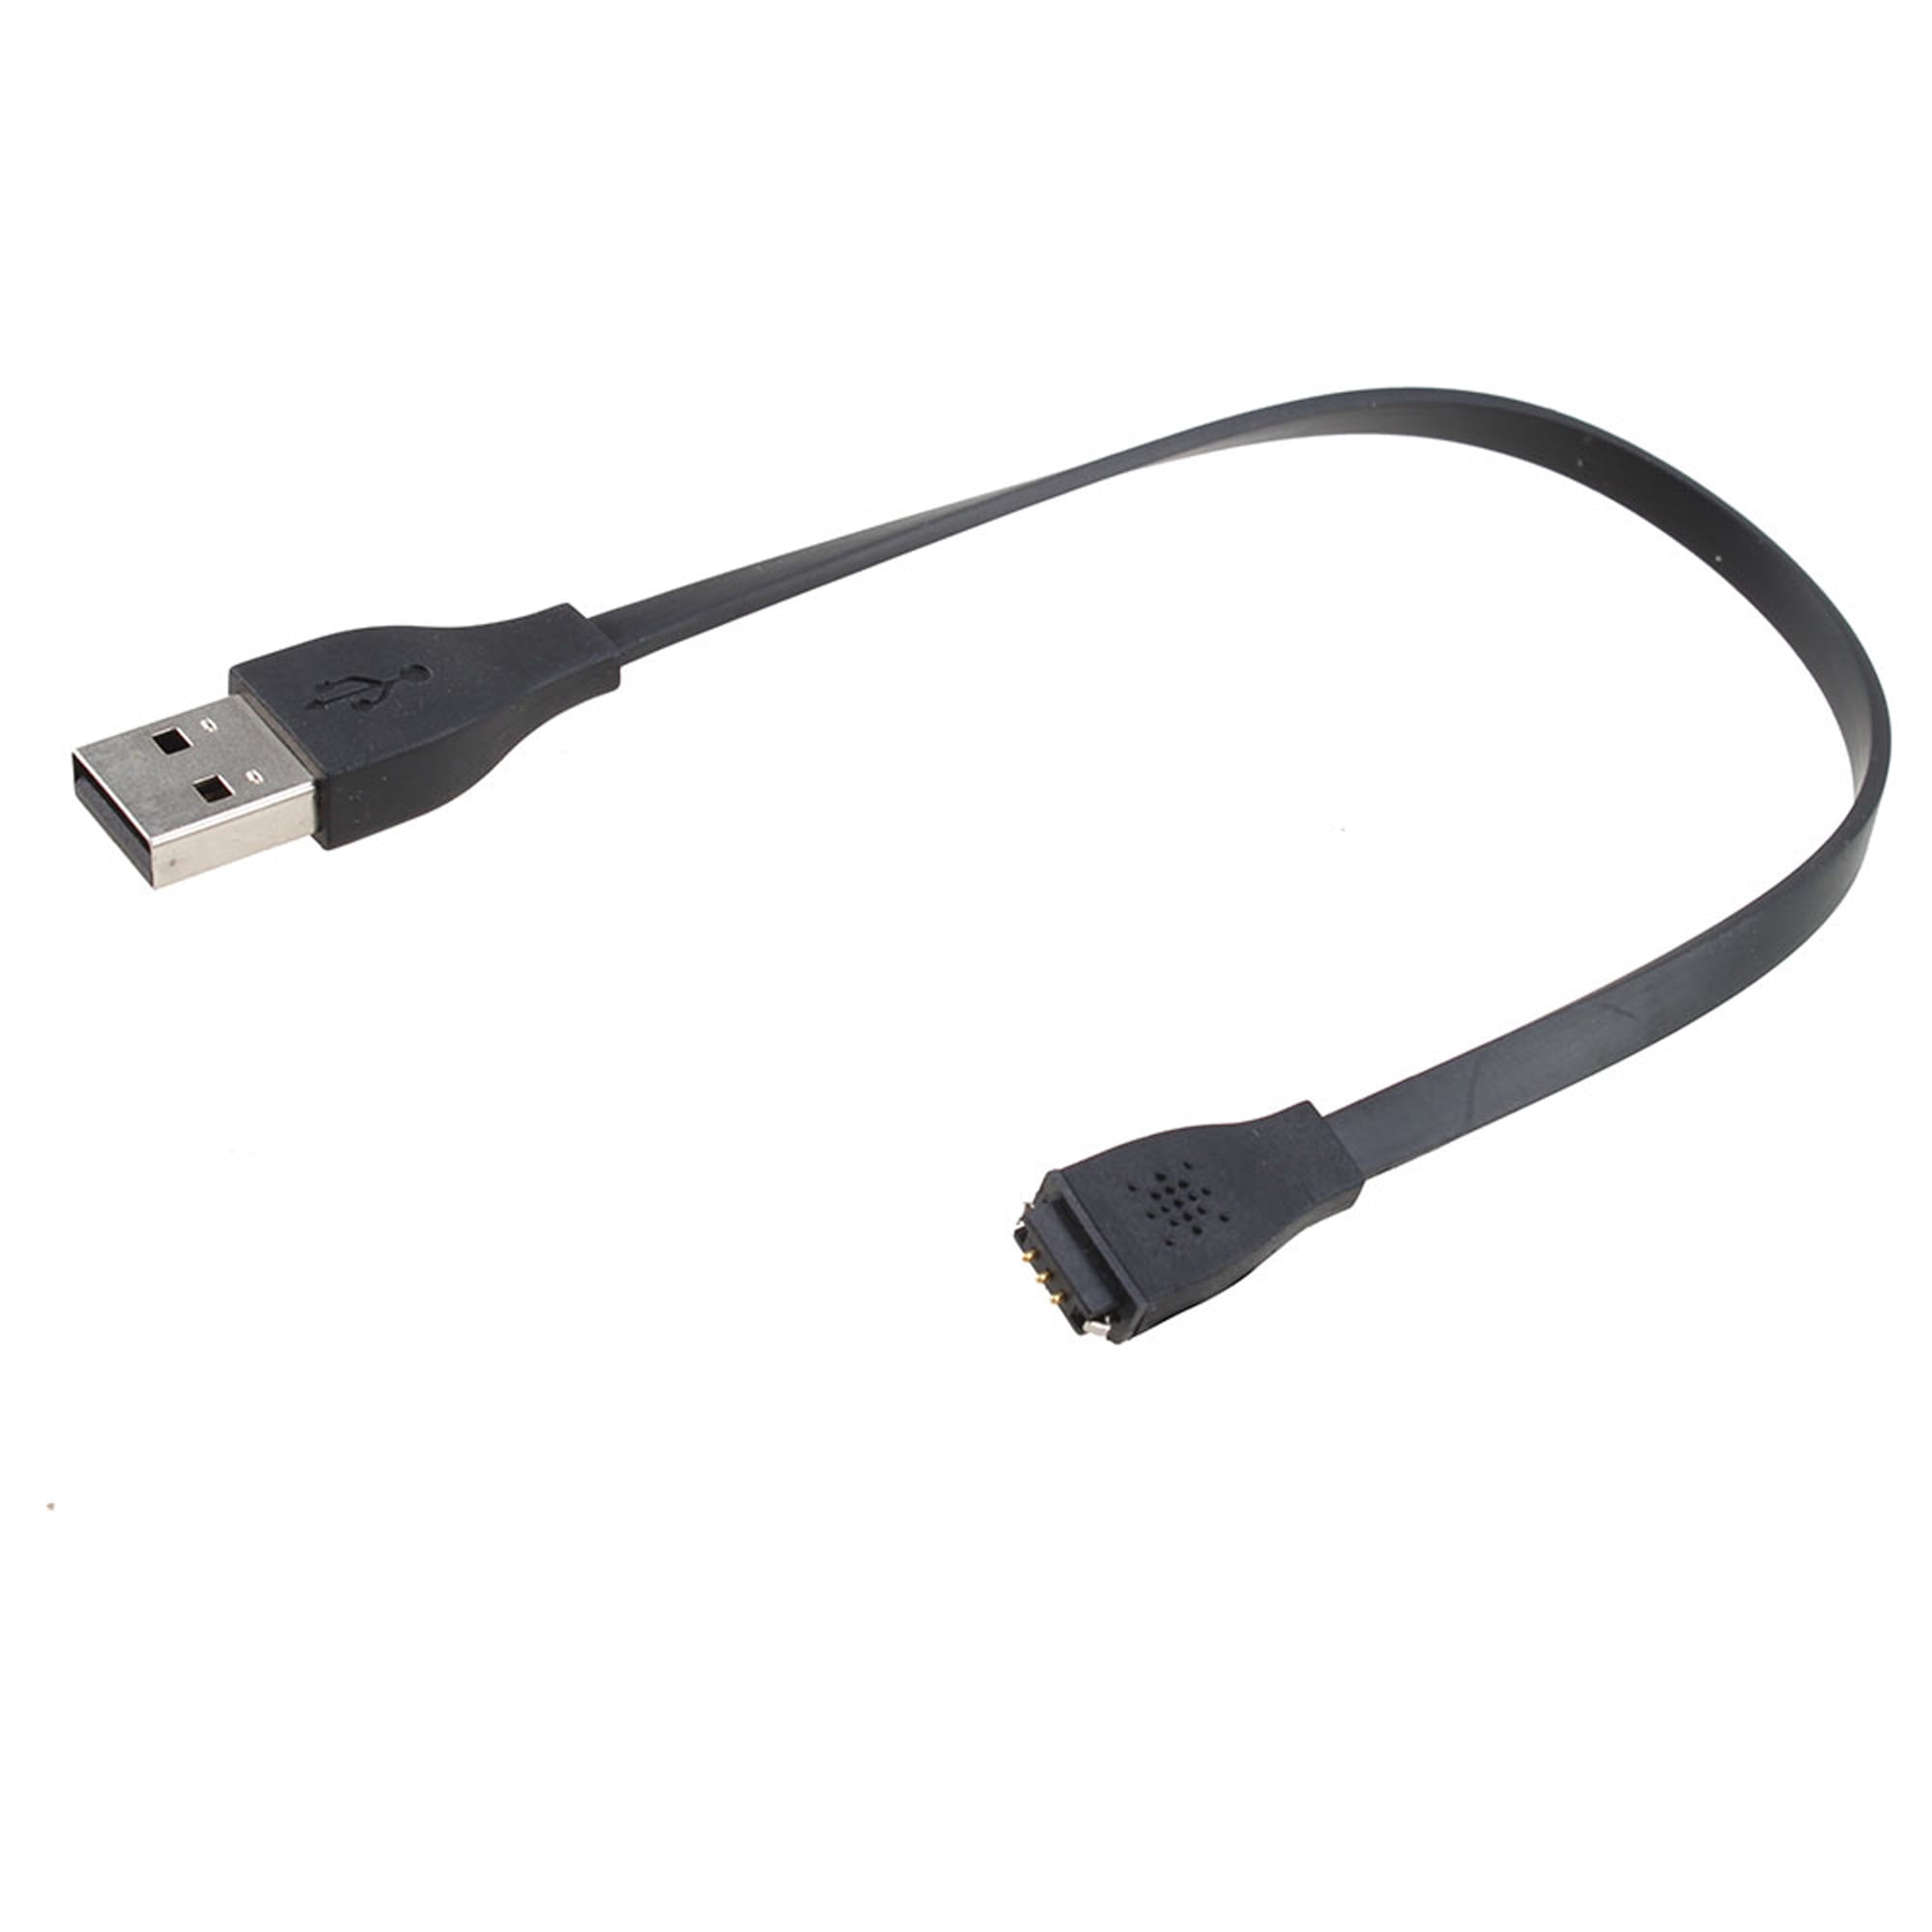 USB Power Charging Cable Cord for Fitbit Force Wrist Band Charger Replacement 